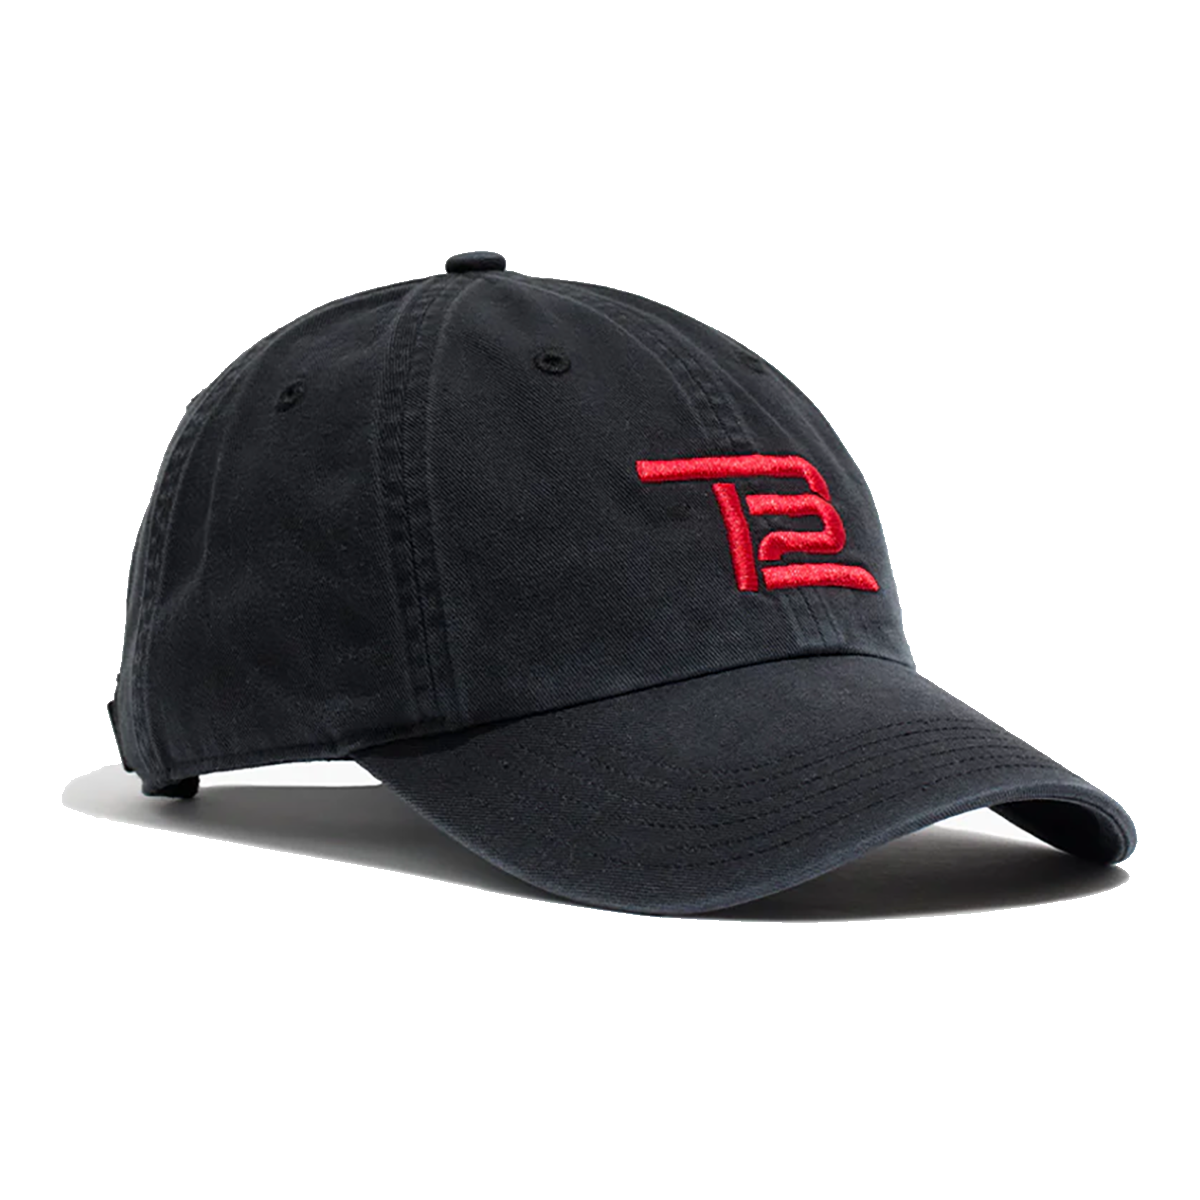 TB12 Keep Going Adjustable Hat, , large image number null